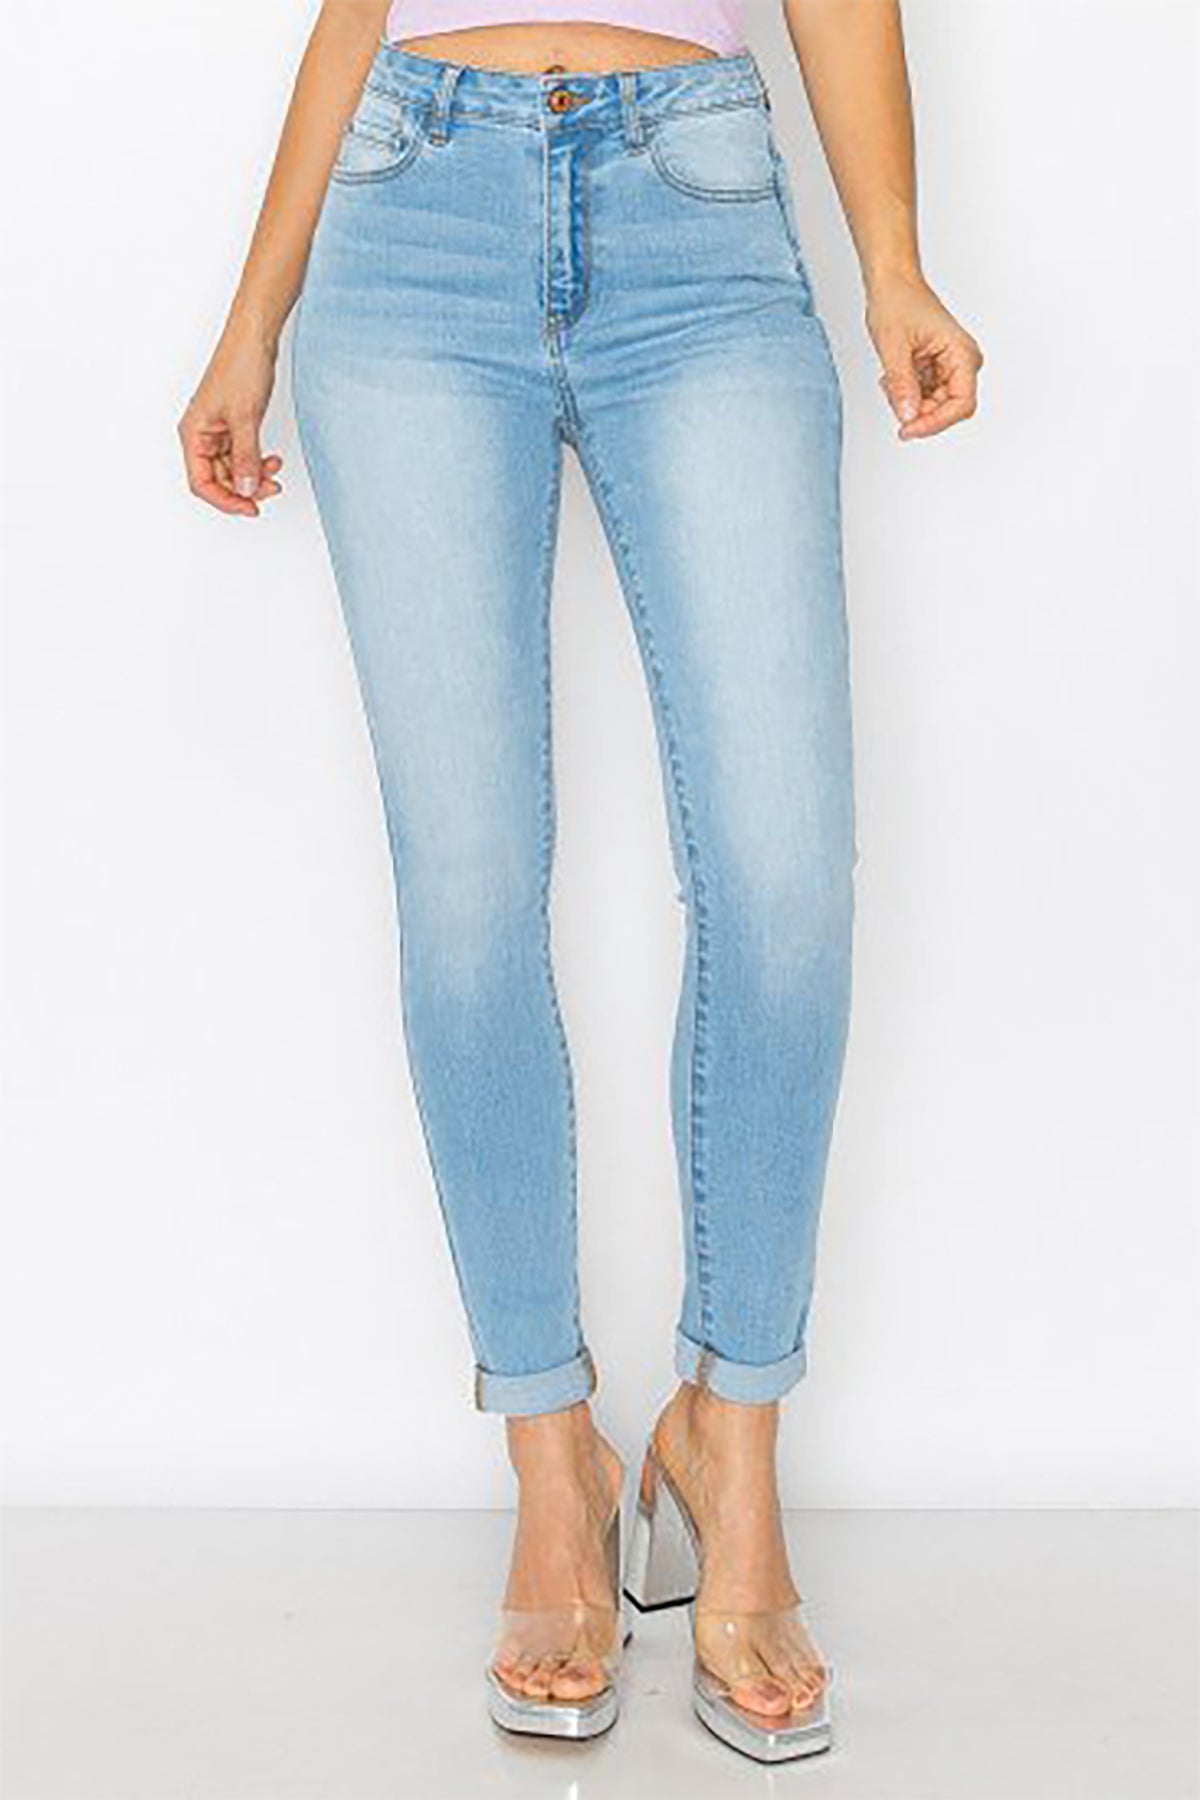 RAYON HIGH RISE SKINNY DENIM PANTS WITH ROLLED CUFF 1-1-2-2-3-2-2-2